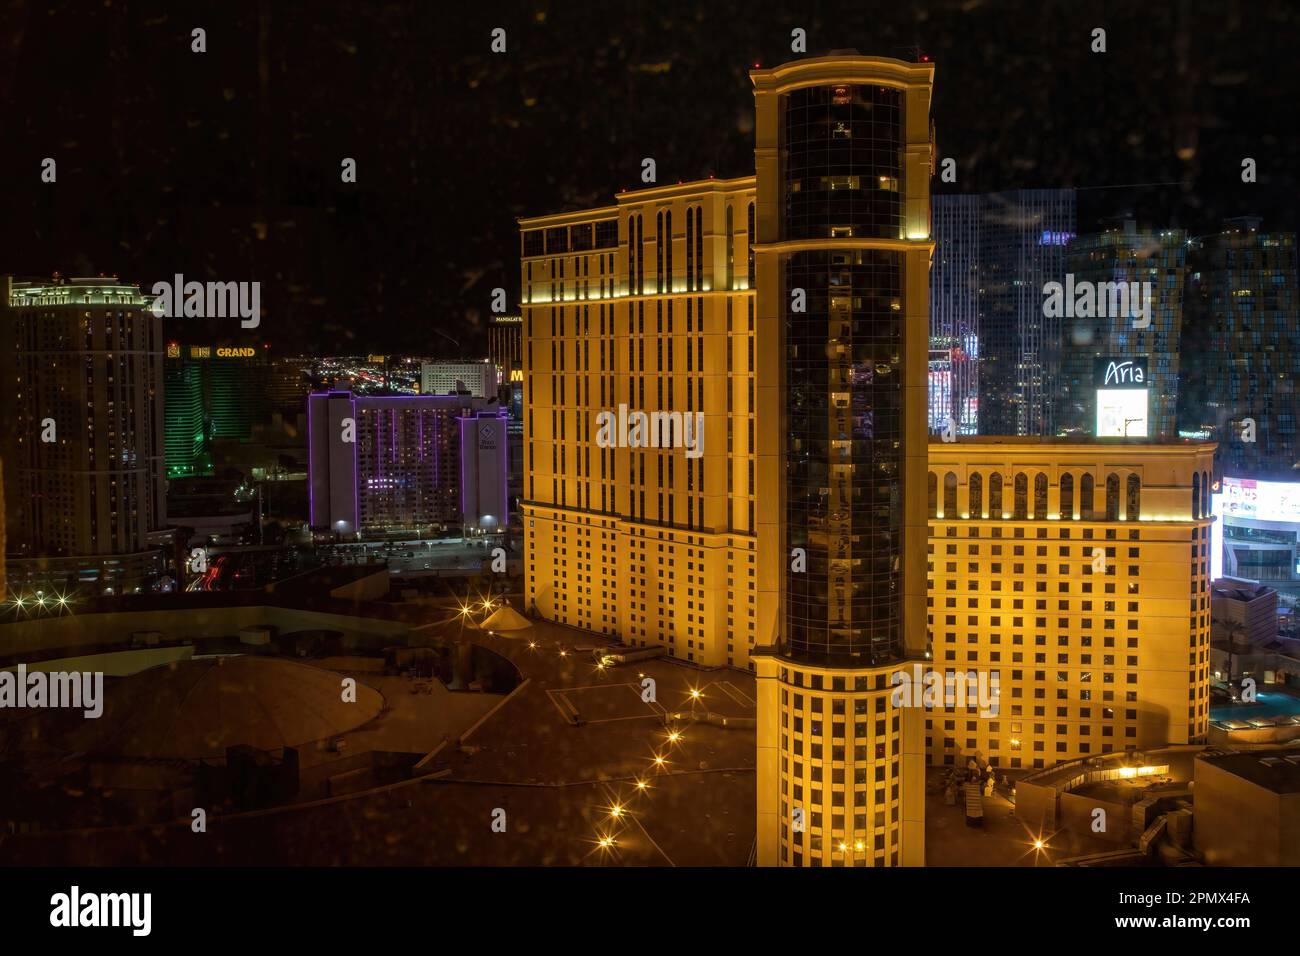 Scene of downtown from a 28th floor room at the Paris Hotel in Las Vegas, Nevada USA. Stock Photo